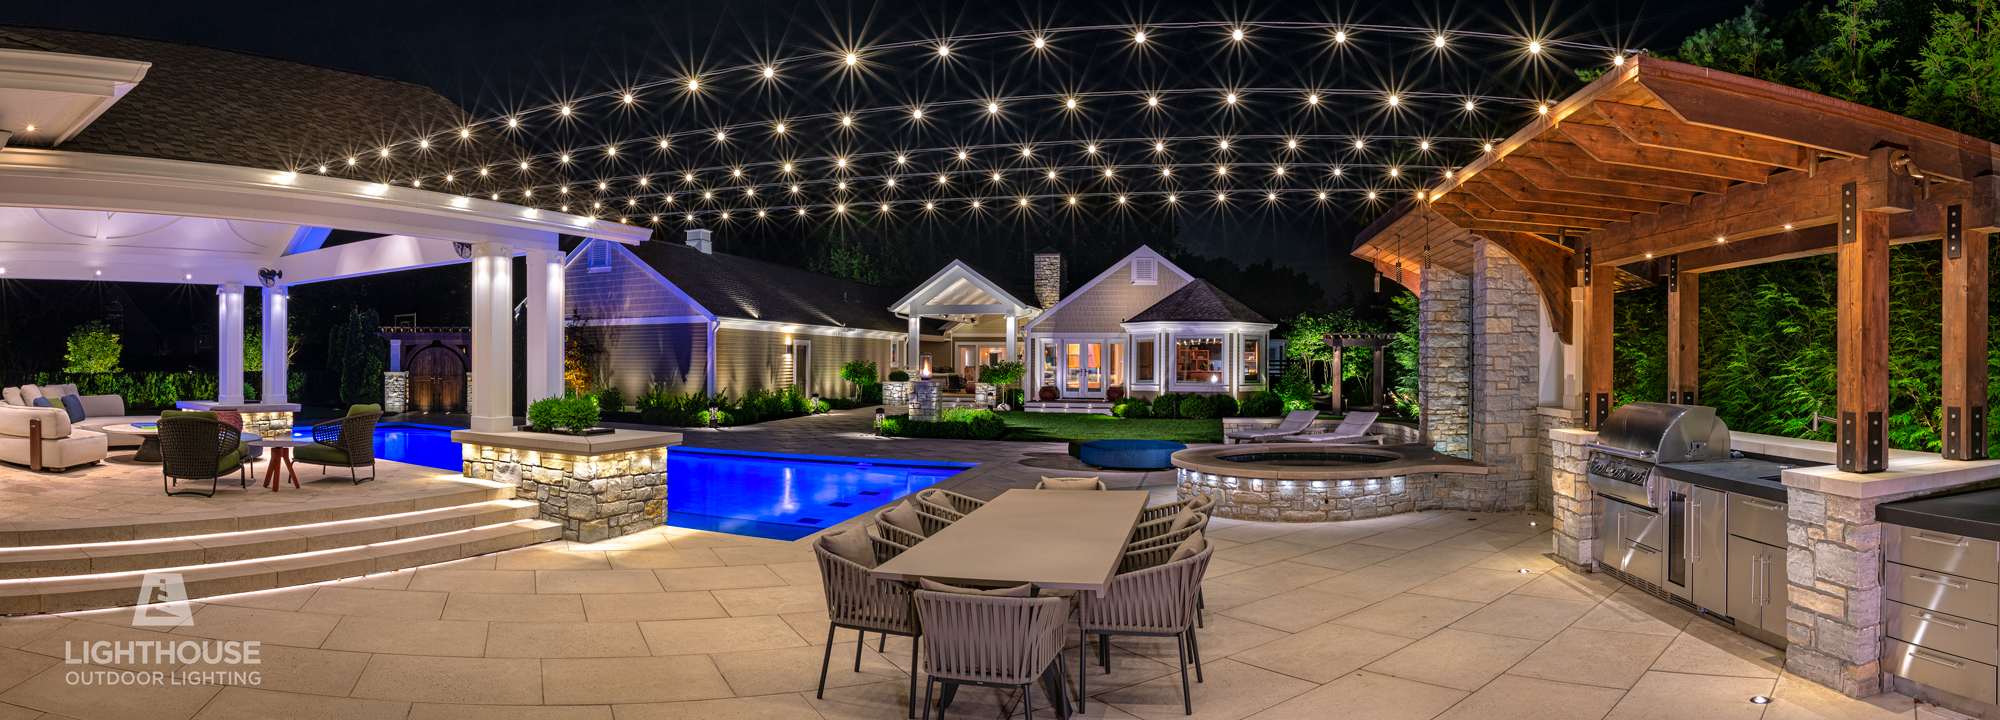 Patio String Lighting in West Des Moines, IA